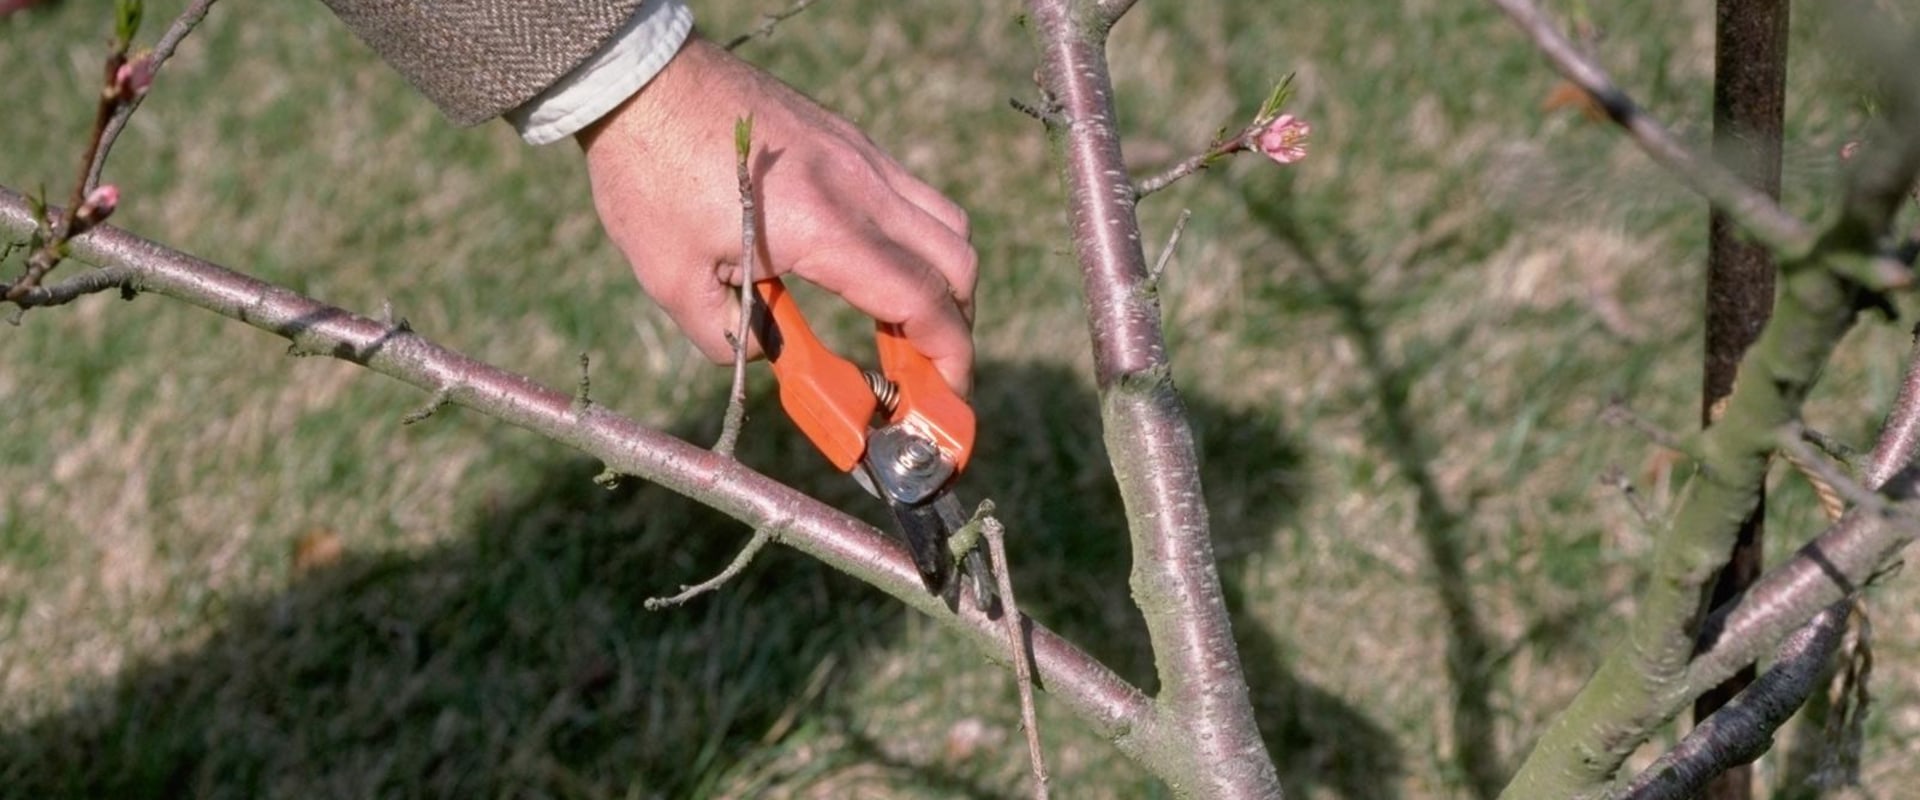 Pruning Trees: A Step-by-Step Guide